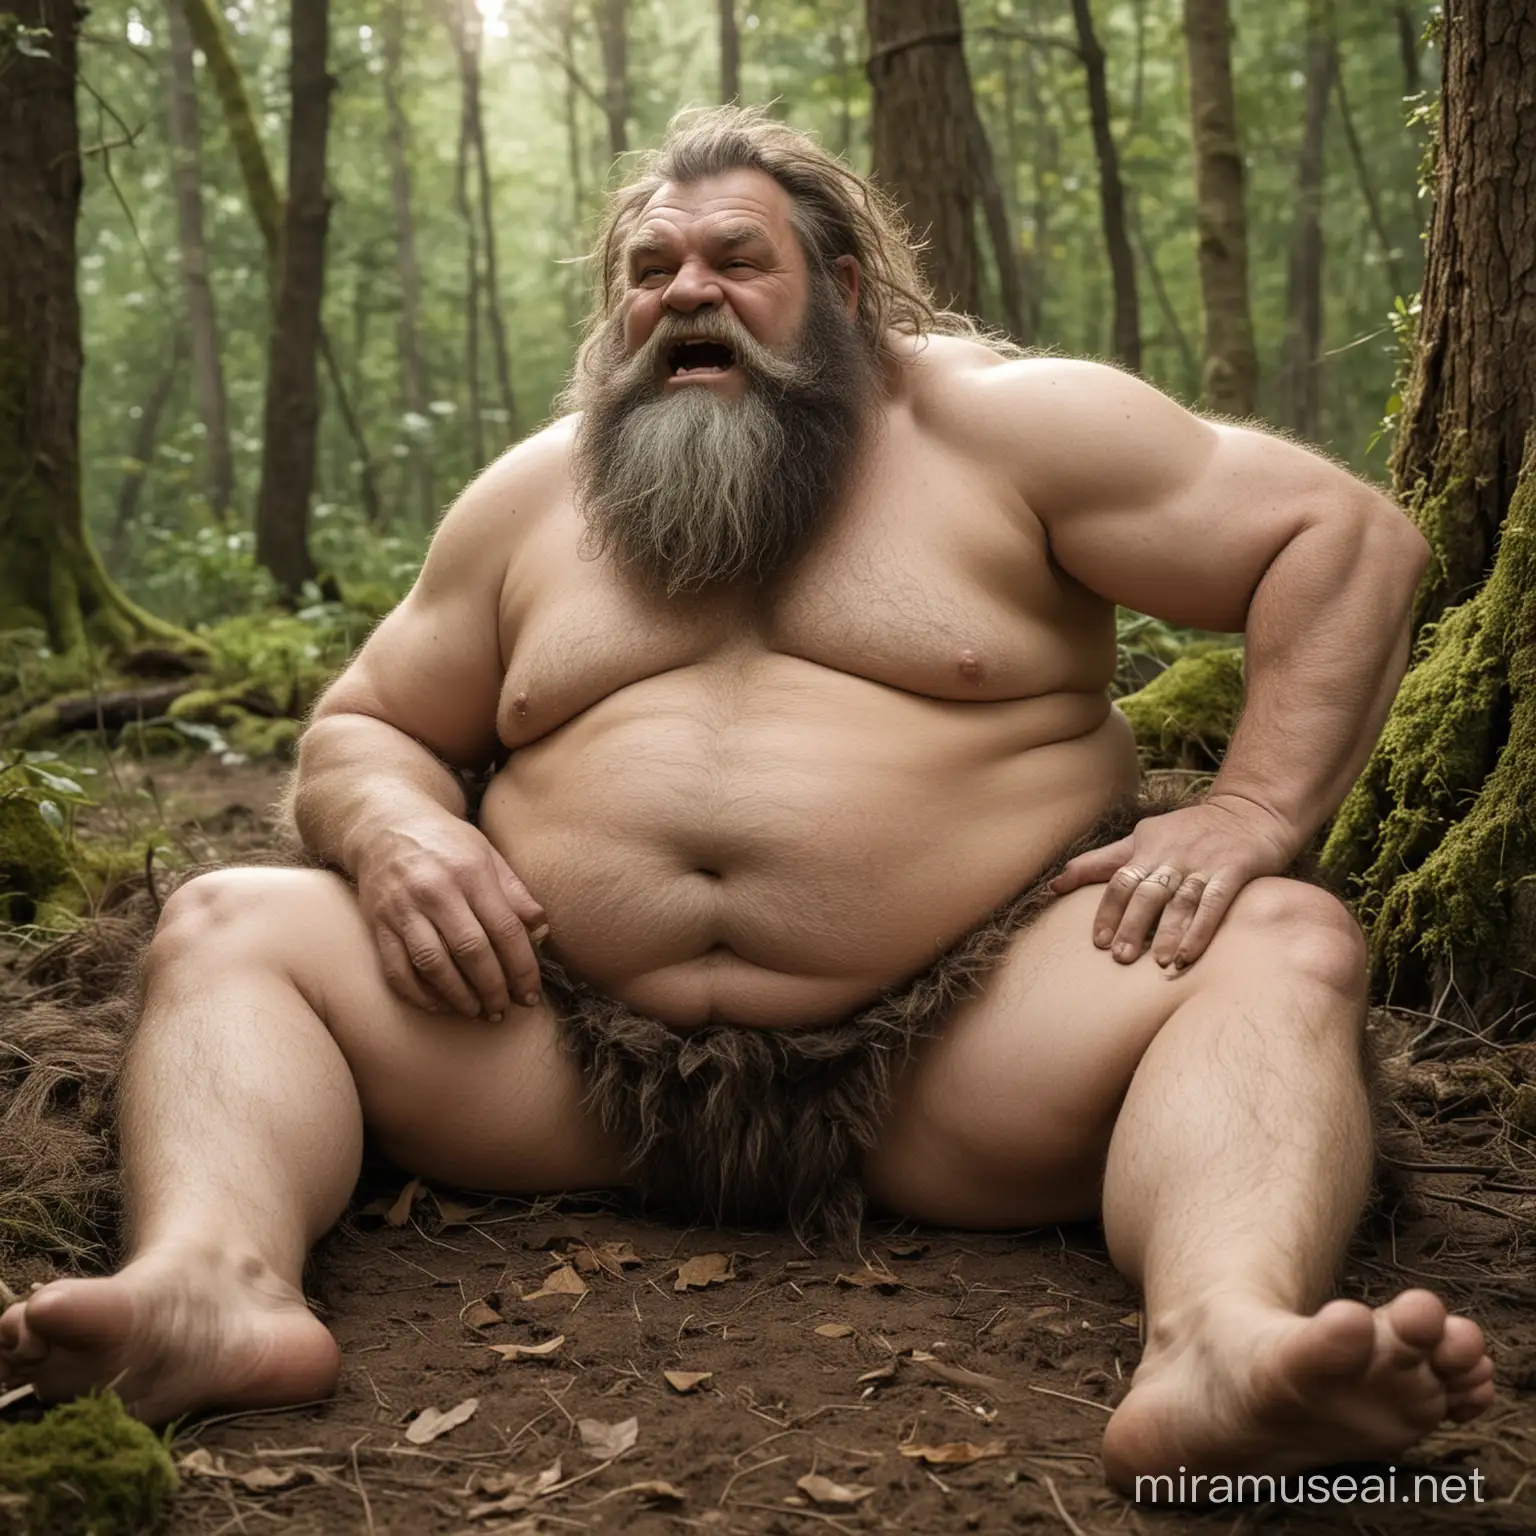 ogre,troll,orc,sasquatch,chubby,shorty,hairy,long beard,Mess hair,old age,chubby,dumpy,primitive,naked,deep forest,belly to the sky,lying down on the ground,fur loincloth,